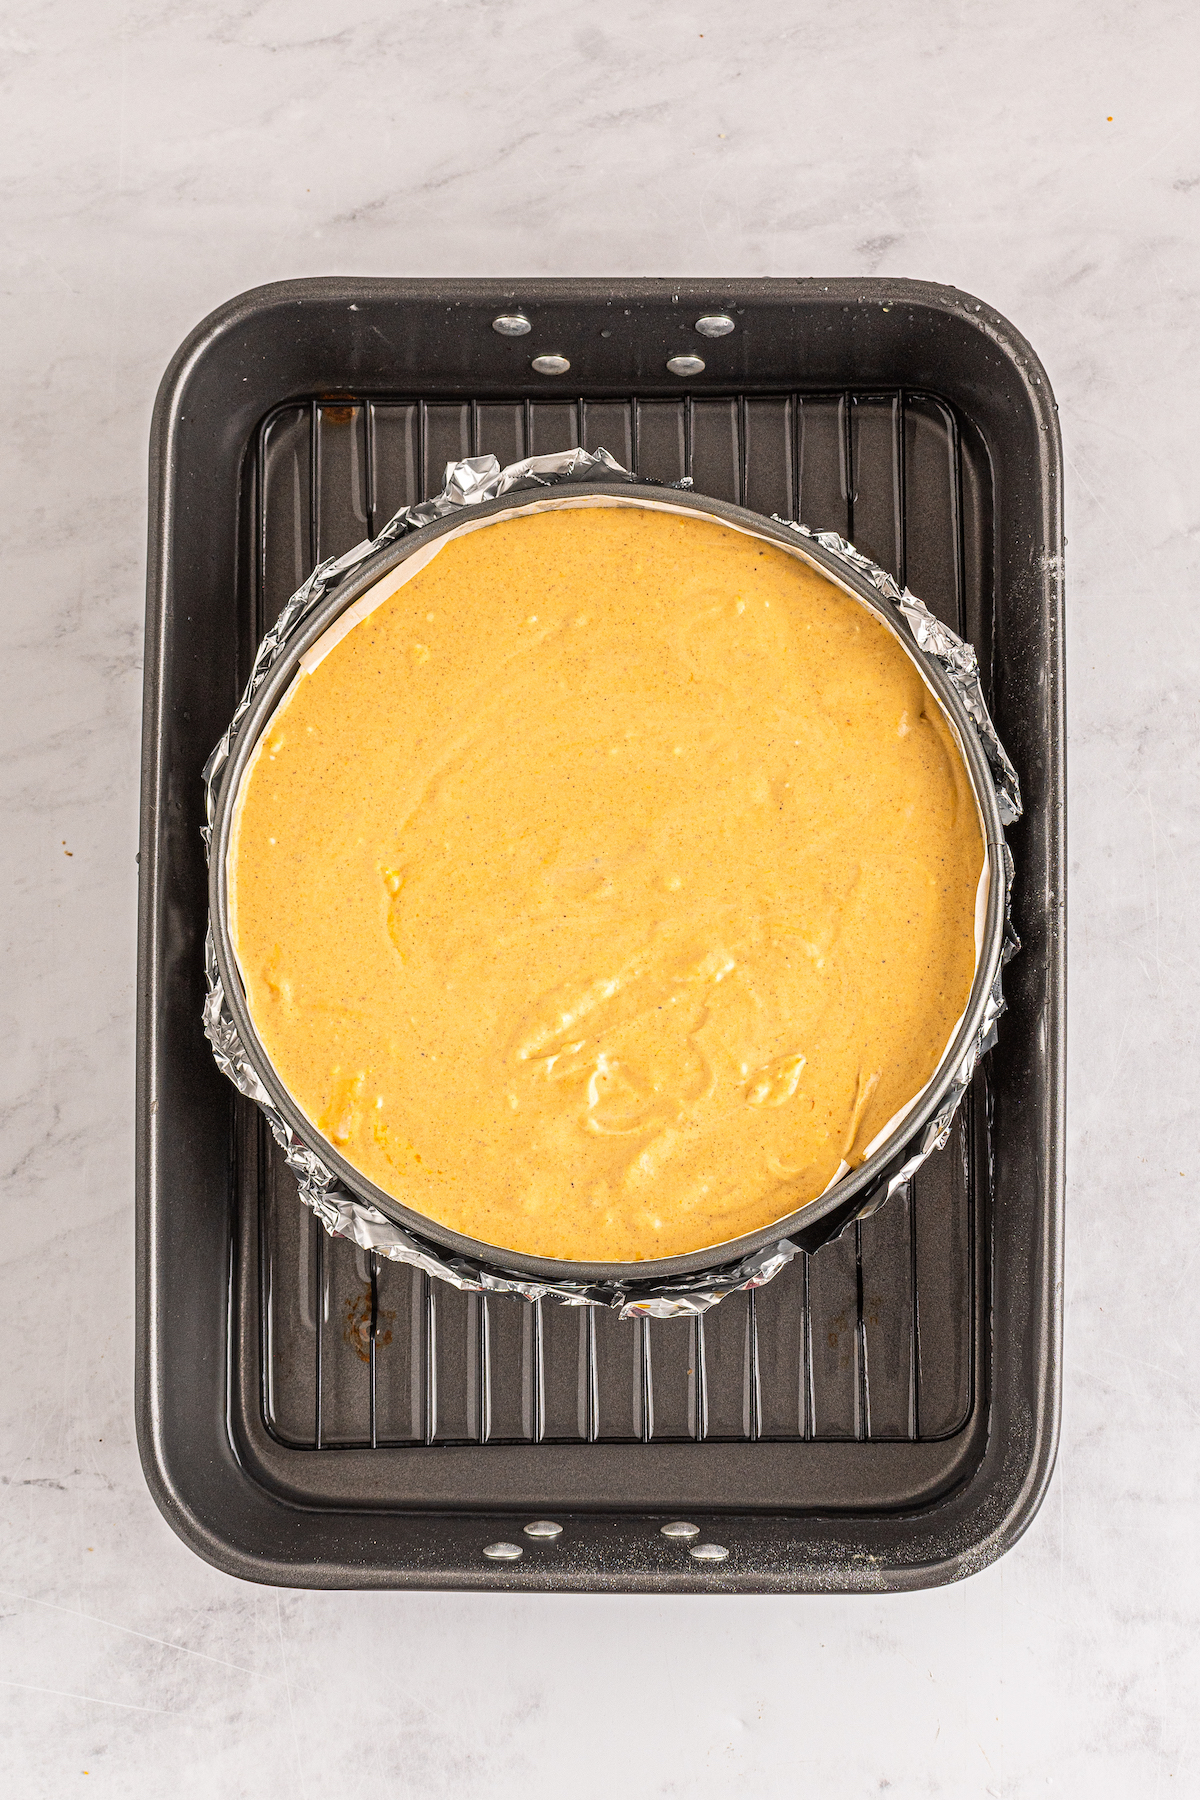 A baking pan partially filled with water, with a springform pan of unbaked cheesecake.